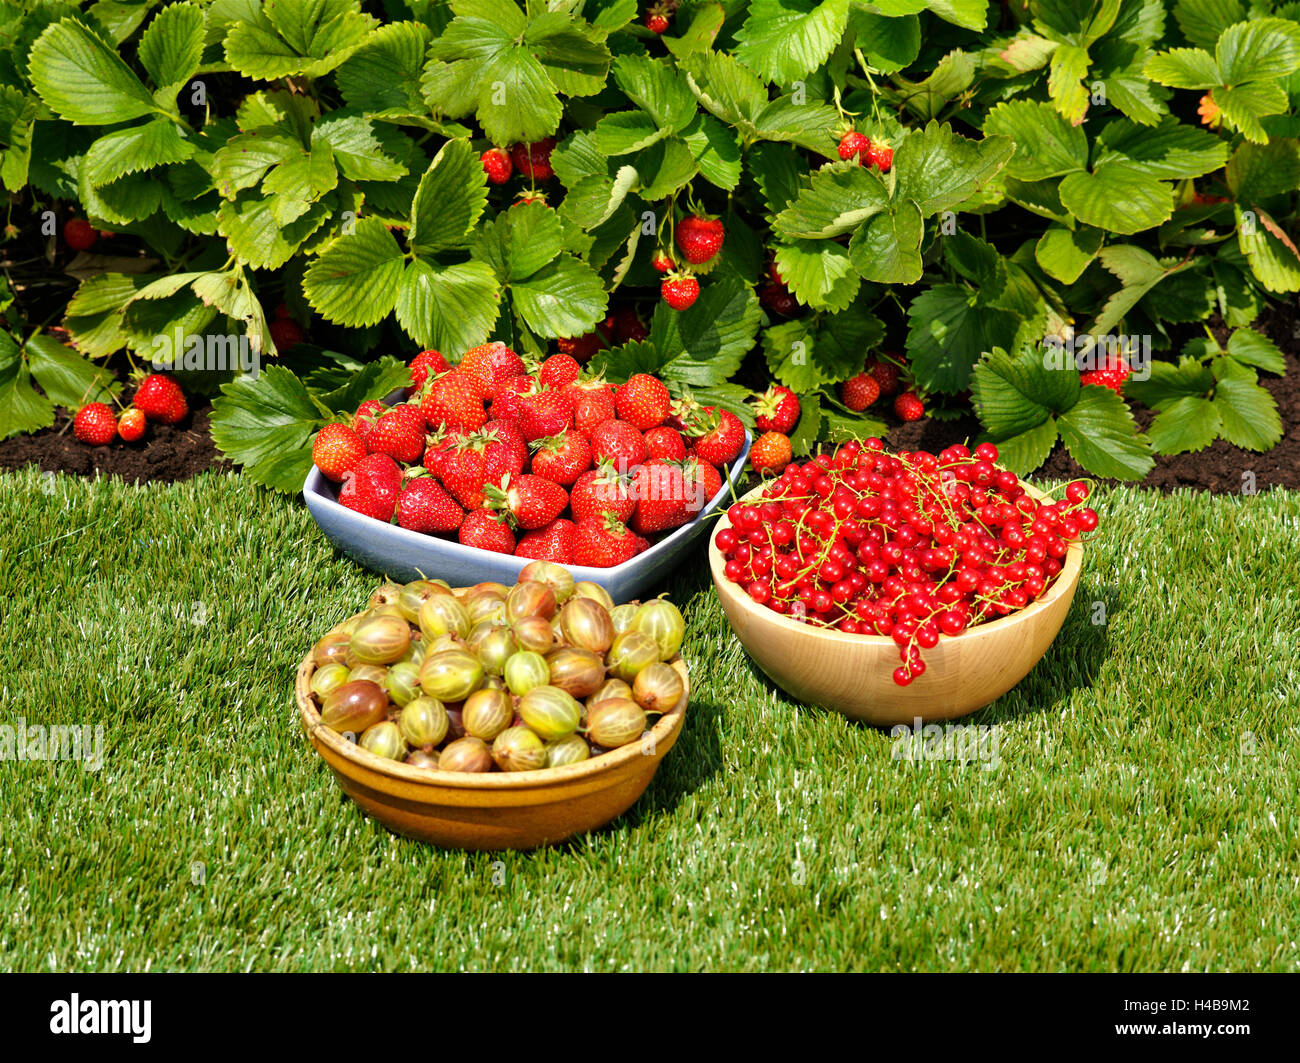 Berries in bowls, garden, lawn, strawberry patch Stock Photo